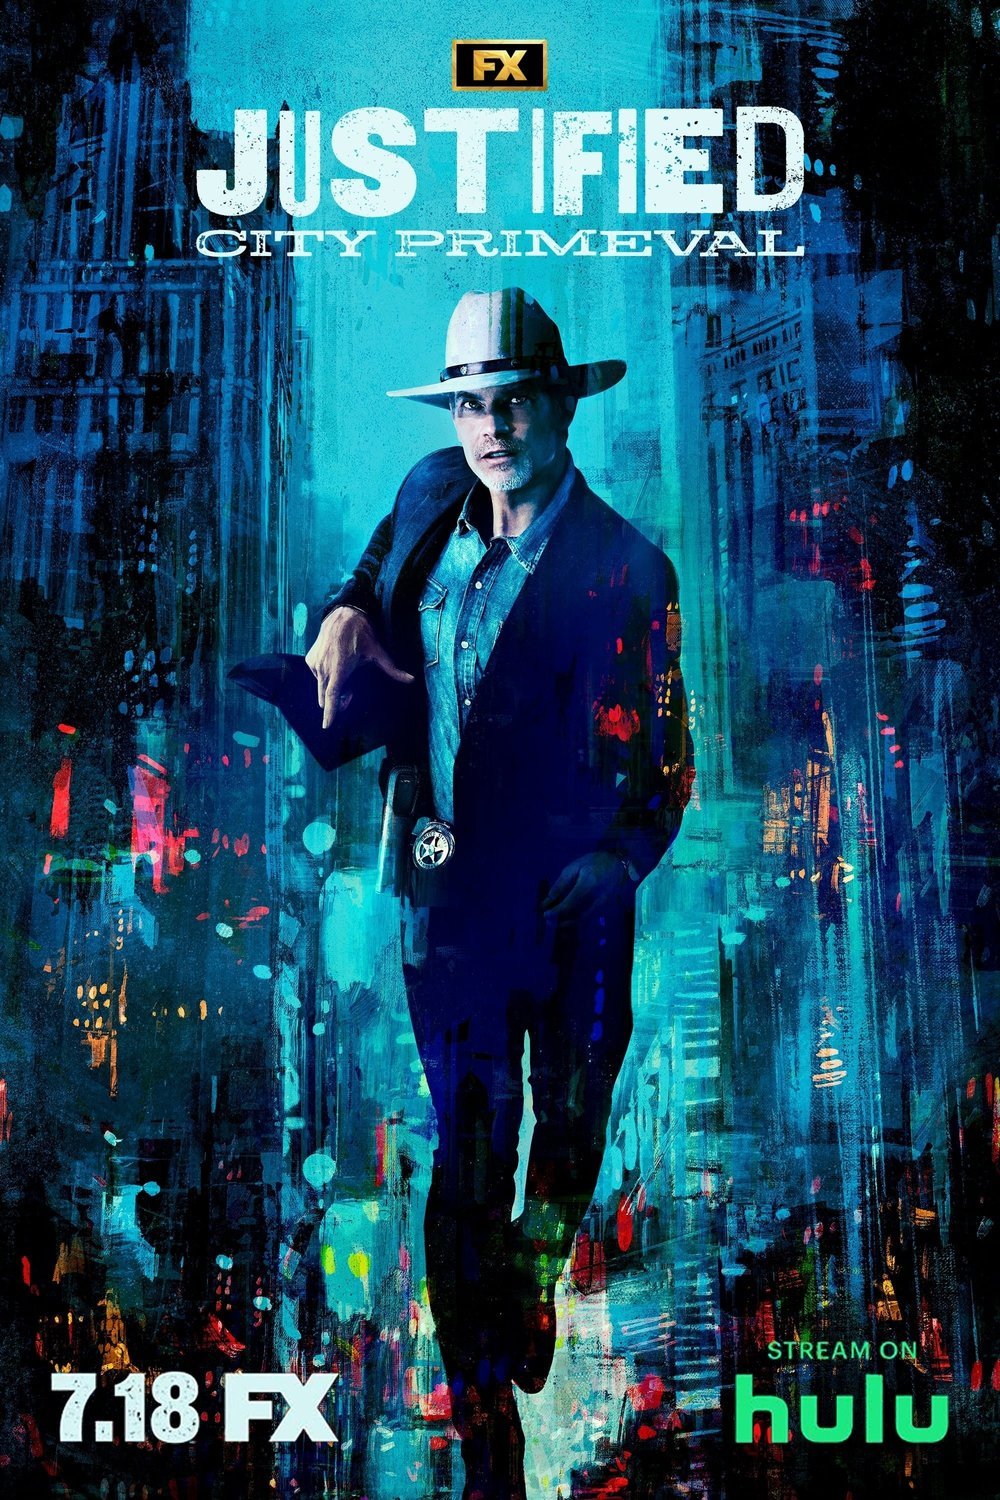 Poster of the movie Justified: City Primeval